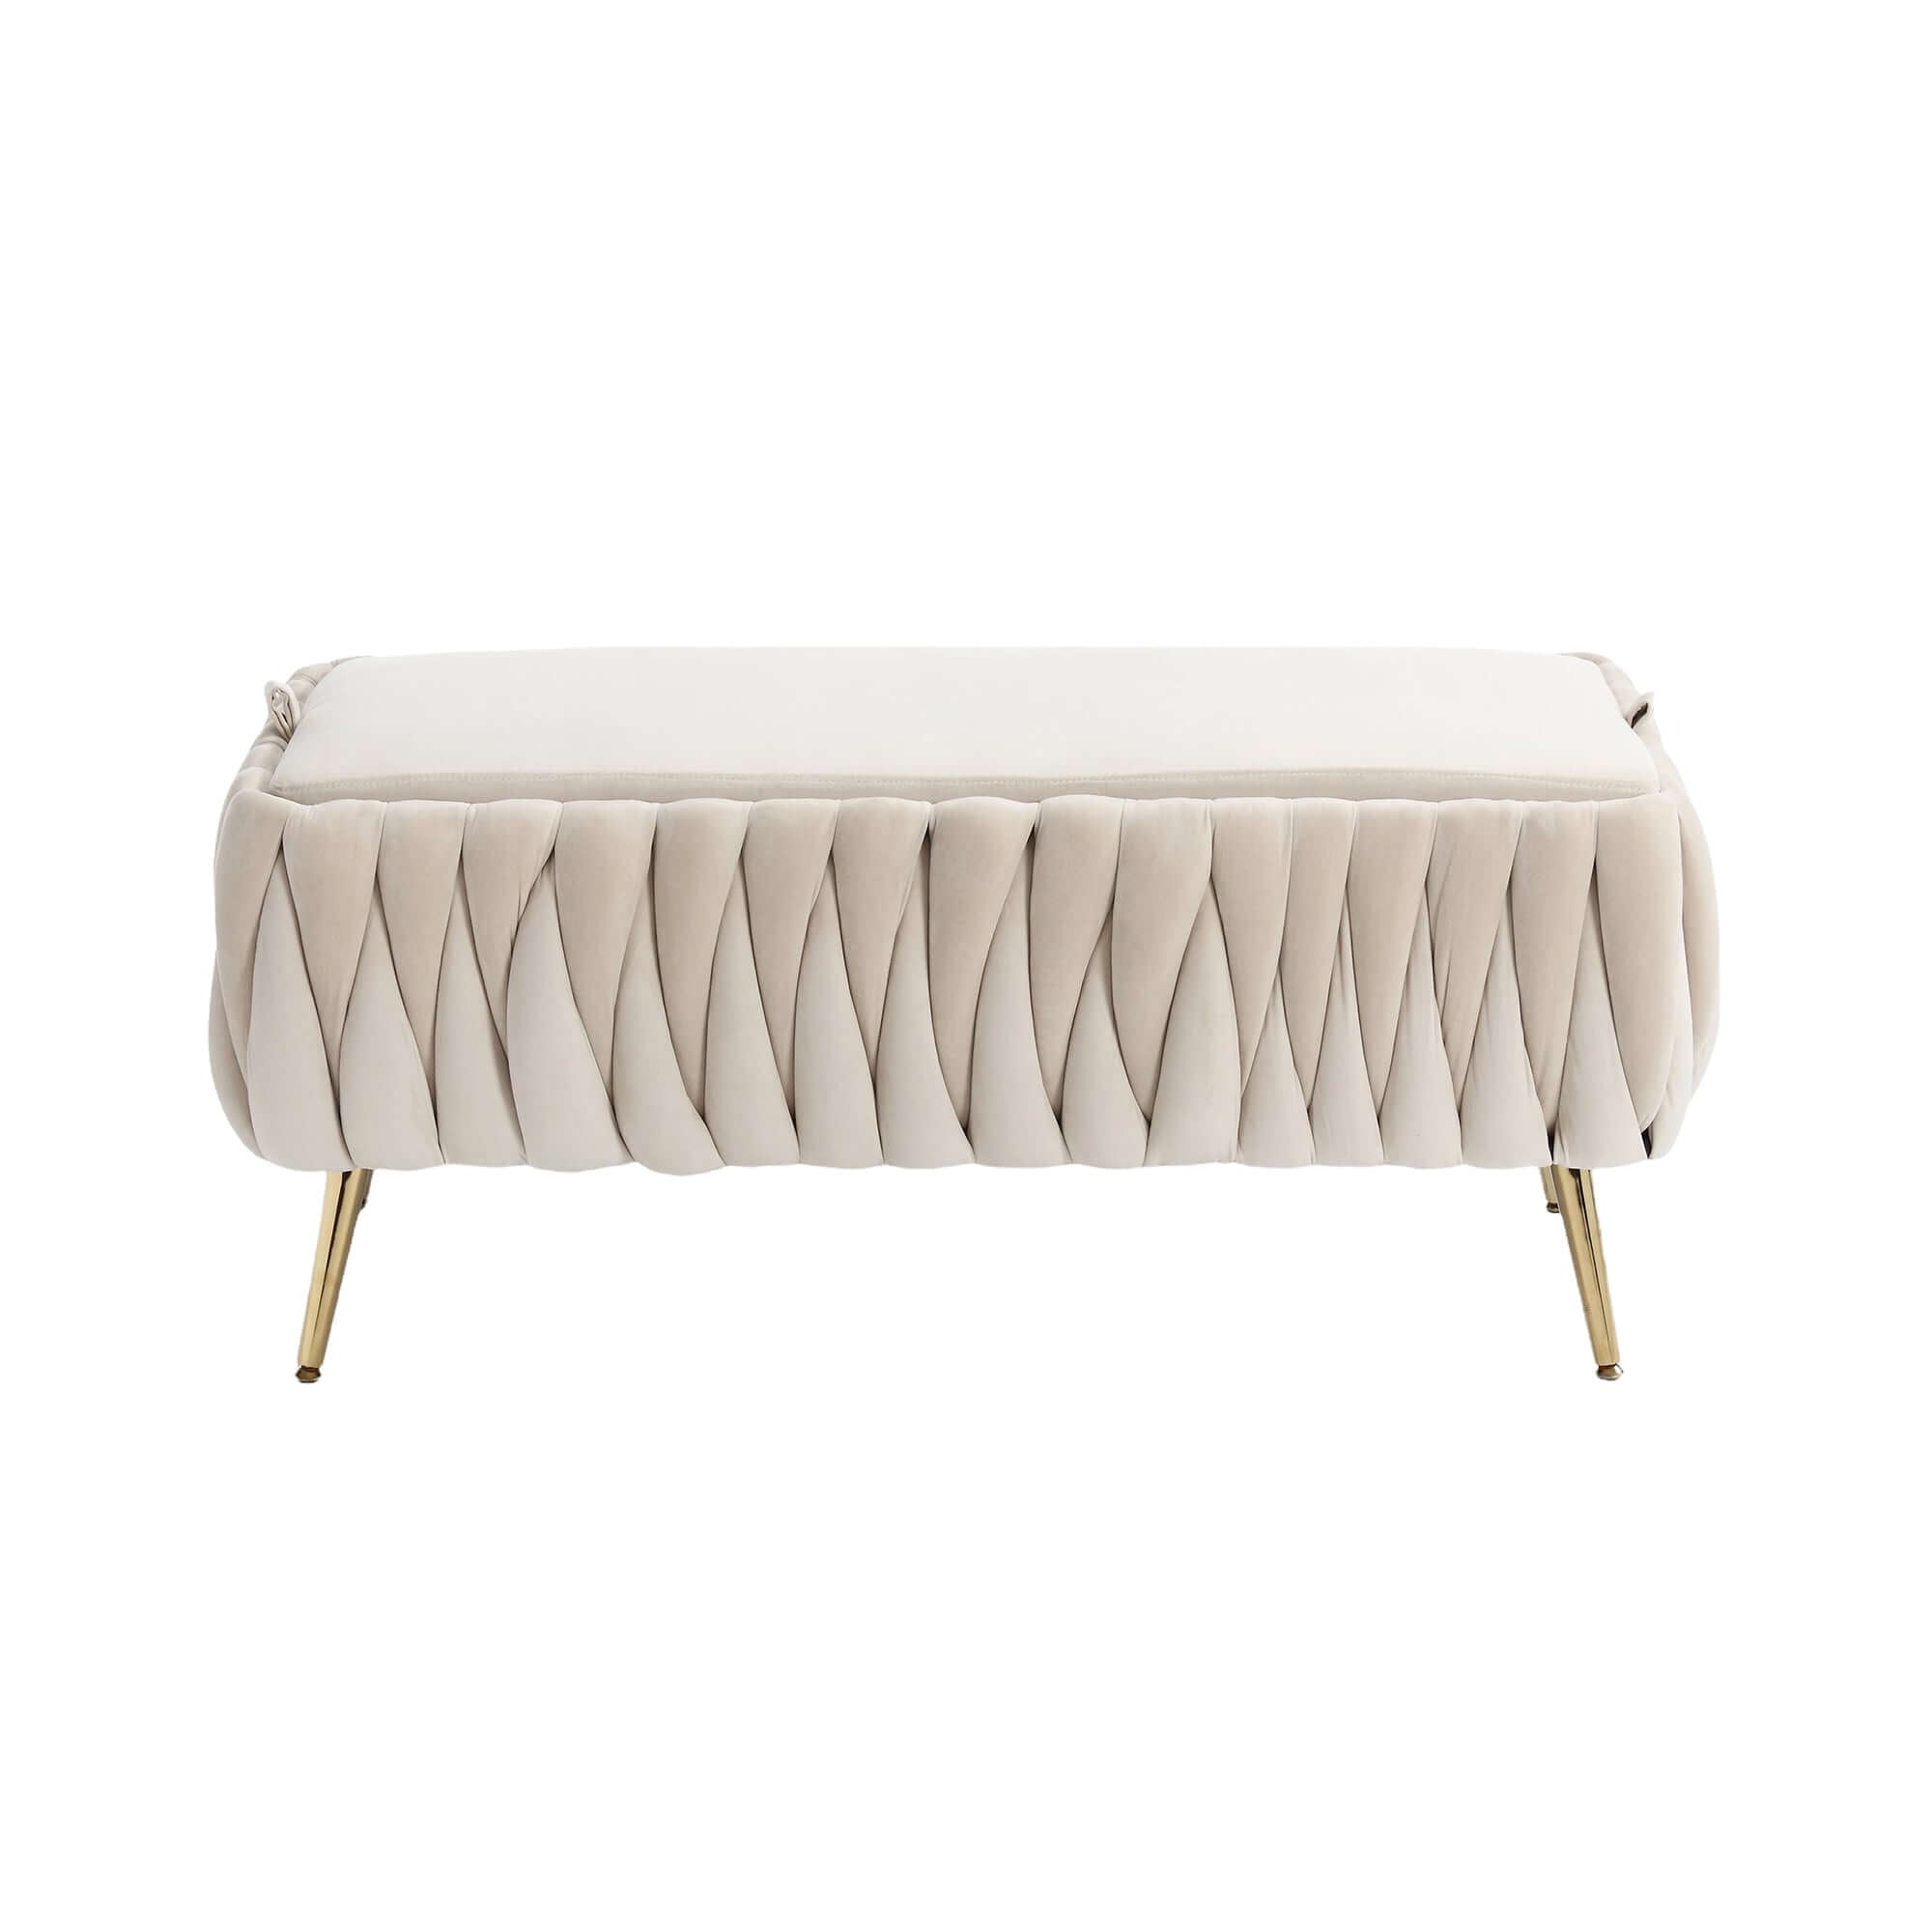 Upholstered Fabric Storage Ottoman Bench with Safety Hinge